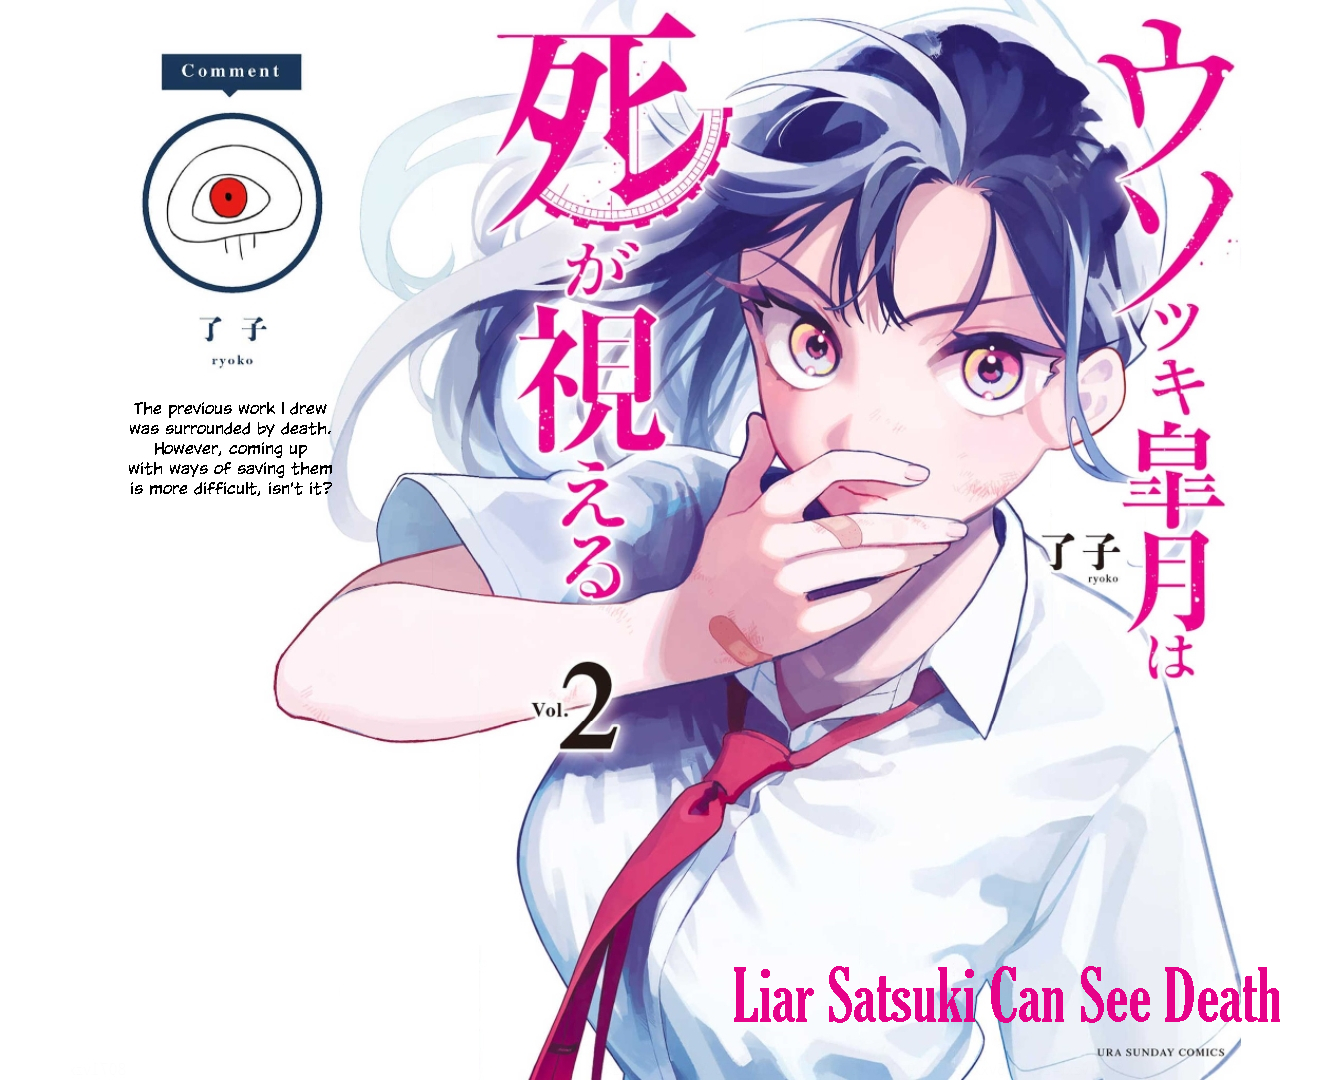 Liar Satsuki Can See Death Vol.2 Chapter 8.9: Volume 2 Cover & Endpapers - Picture 1